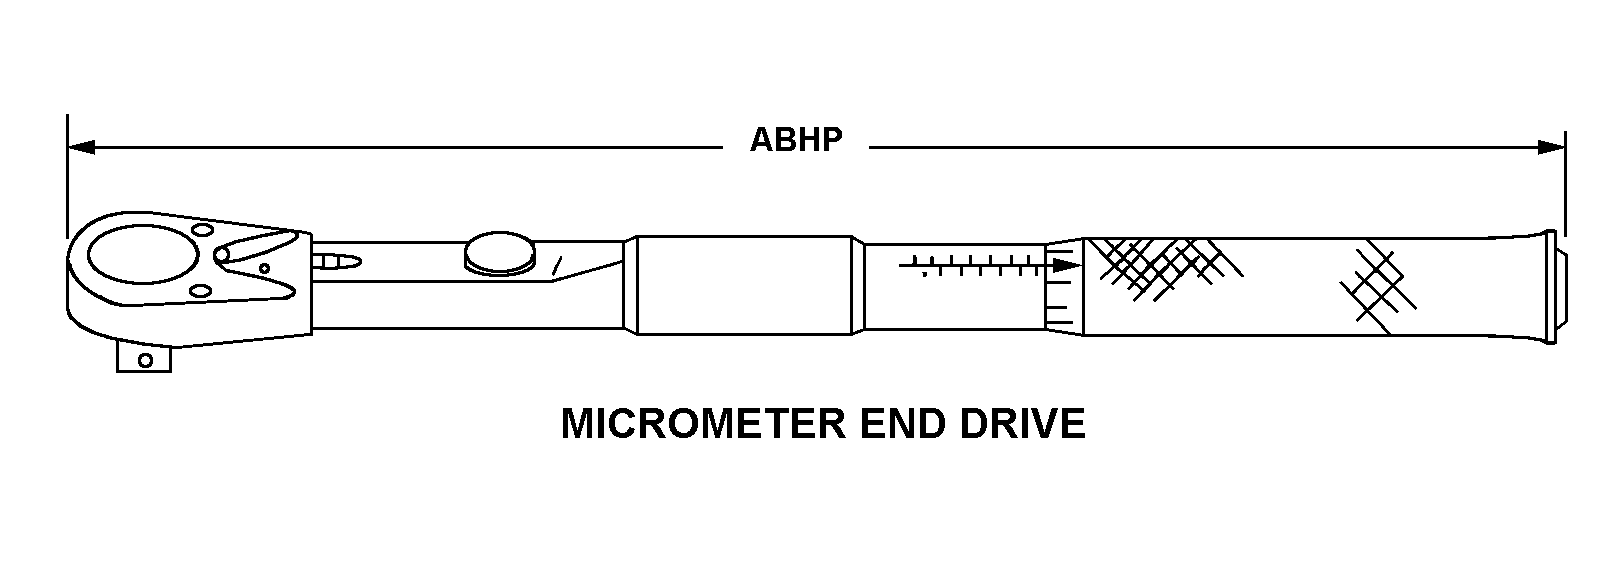 MICROMETER END DRIVE style nsn 5120-01-241-7577